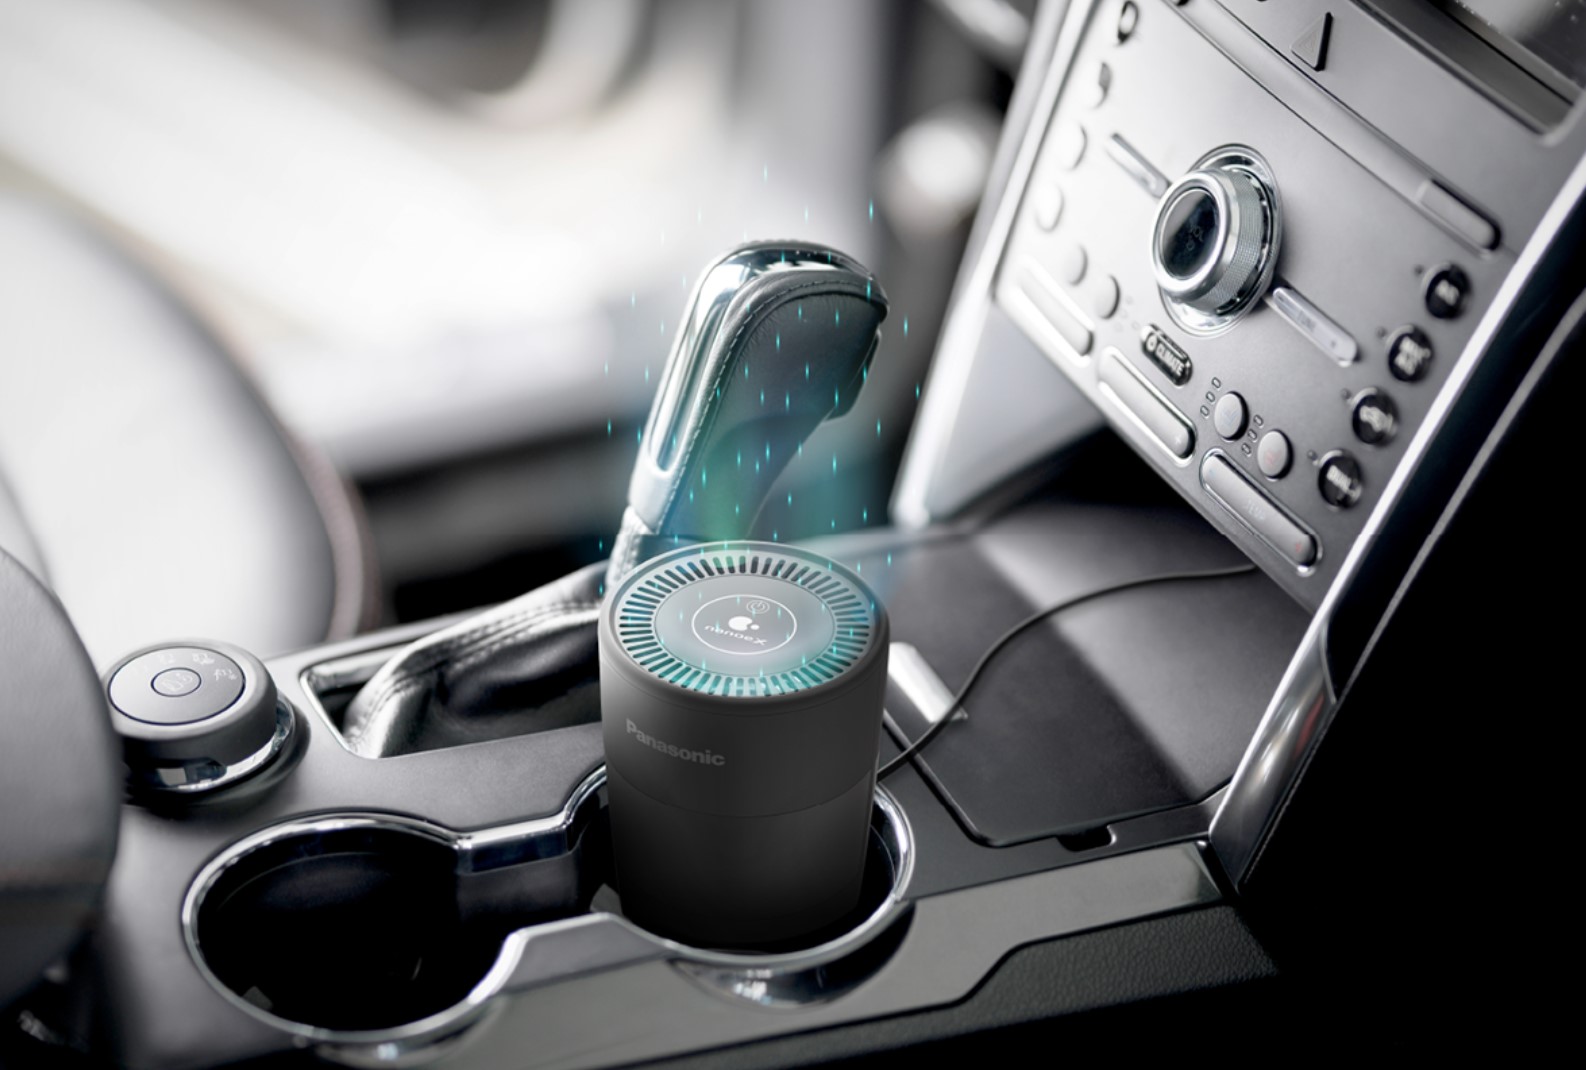 The Panasonic Automotive nanoeX air purifier rests in a vehicle cup holder